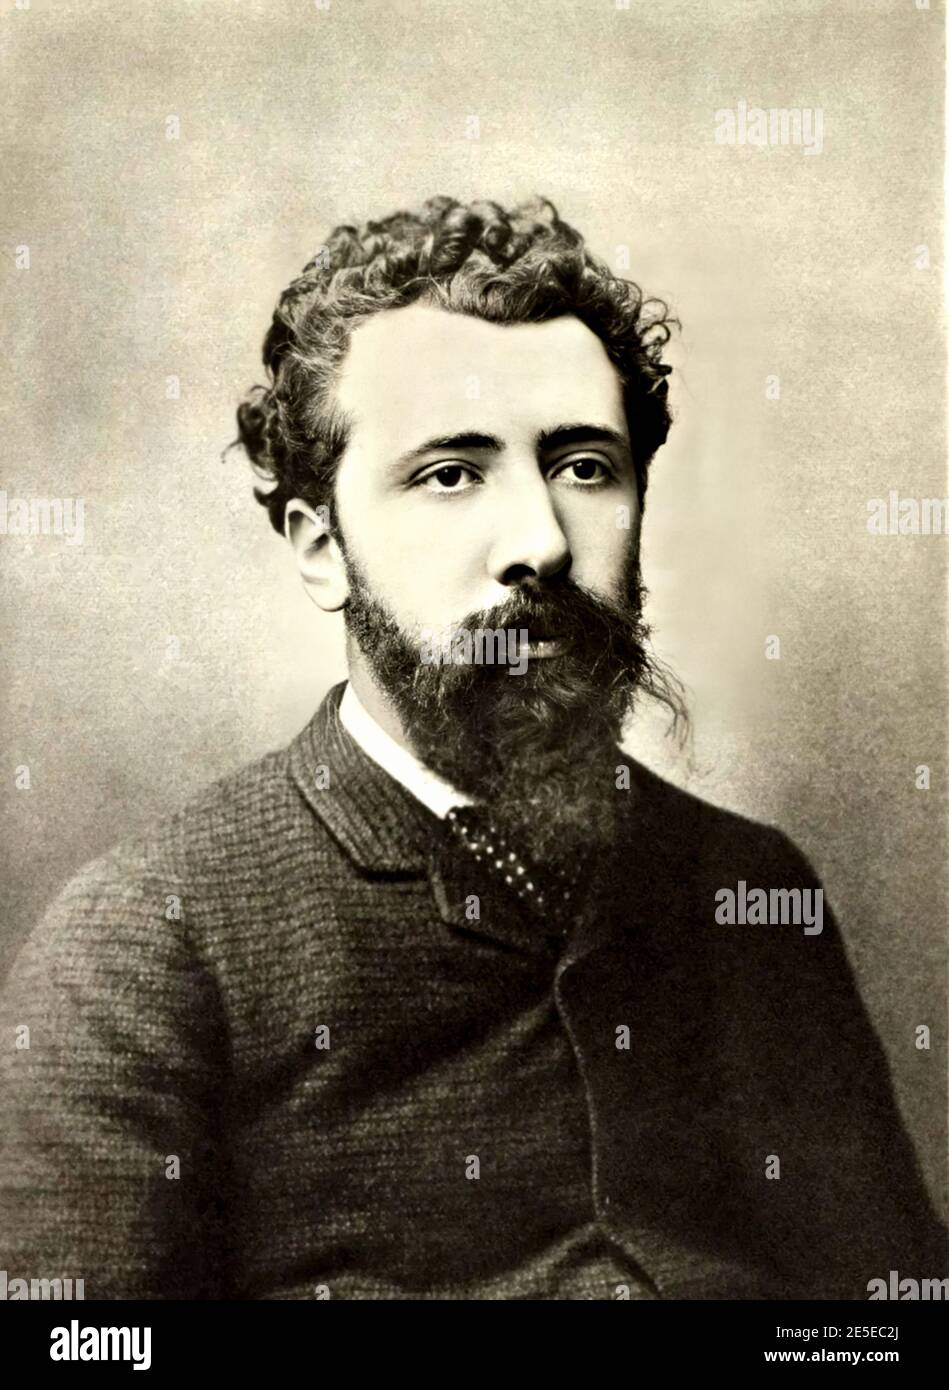 1890 ca , Paris , FRANCE : The  french  Impressioniste painter GEORGES SEURAT ( 1859 - 1891 ). Portrait by unknown photographer . - ARTS - ARTE - PITTURA - painting - PITTORE - artist - artista - portrait - ritratto - IMPRESSIONISTA - IMPRESSIONISMO - POINTINISME - DIVISIONISMO - DIVISIONISTA - IMPRESSIONISME - beard - barba - HISTORY - FOTO STORICHE --- ARCHIVIO GBB Stock Photo